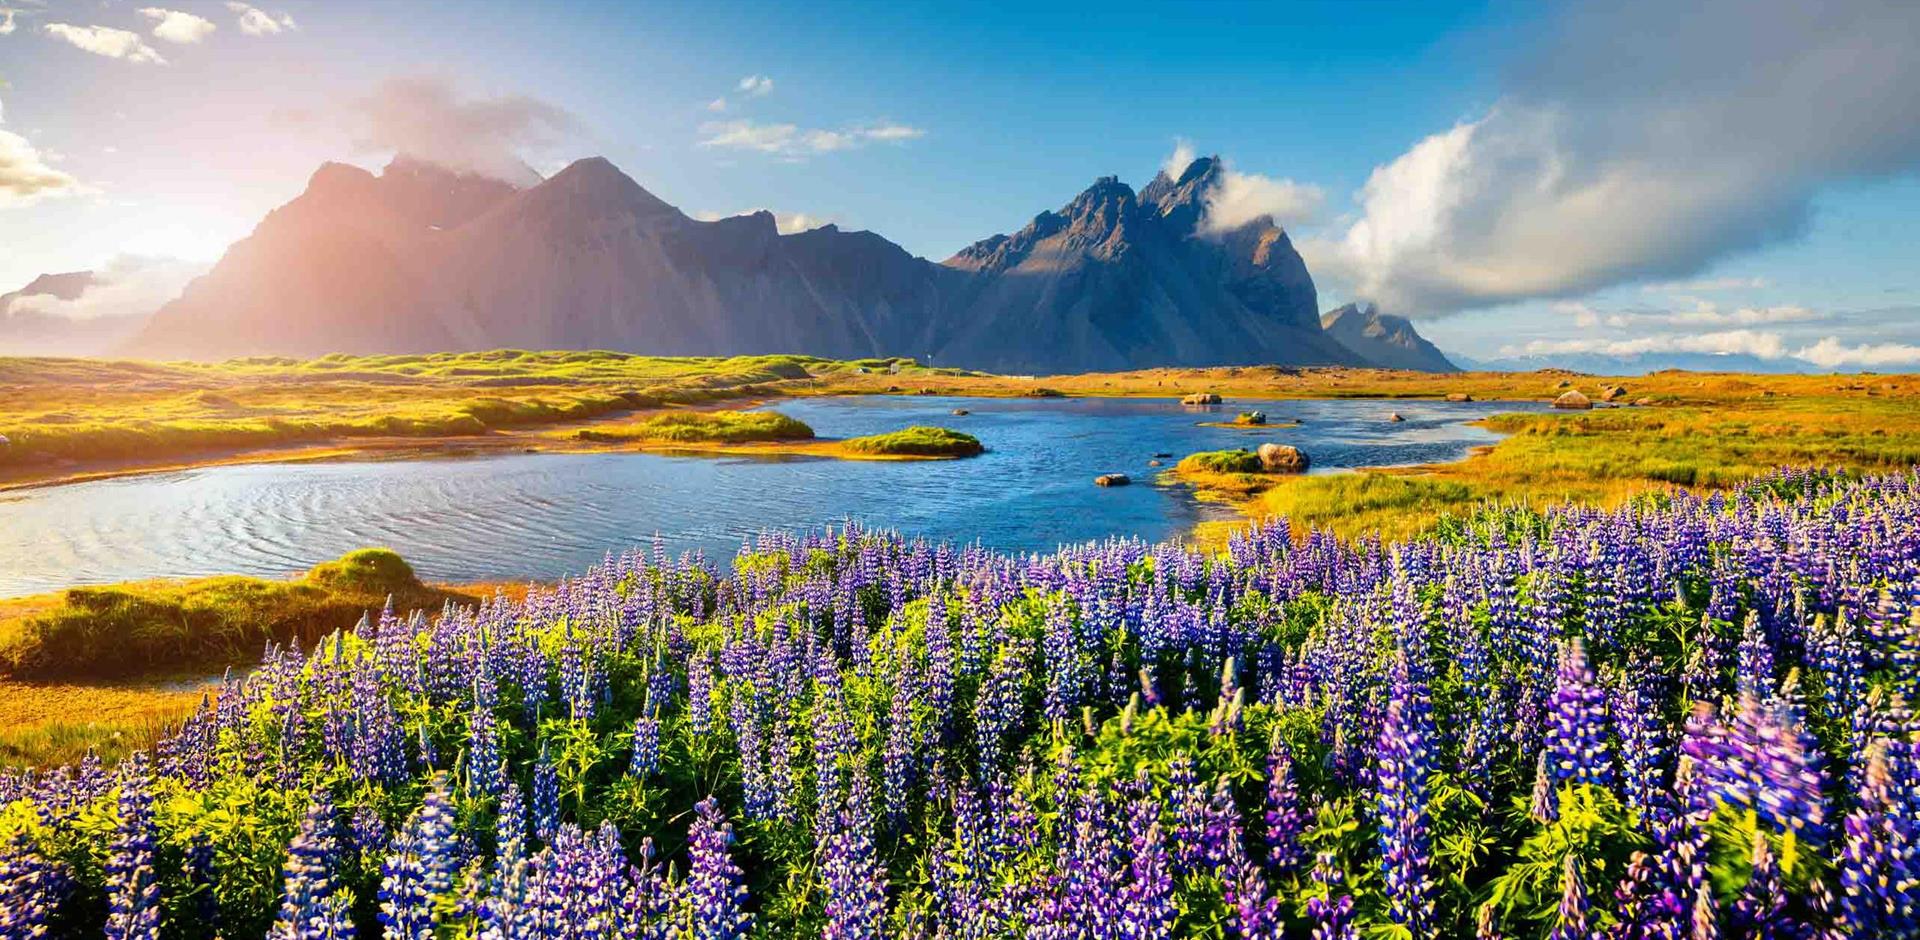 Natural scenery with lupine flowers, Stokksness, Iceland, Europe